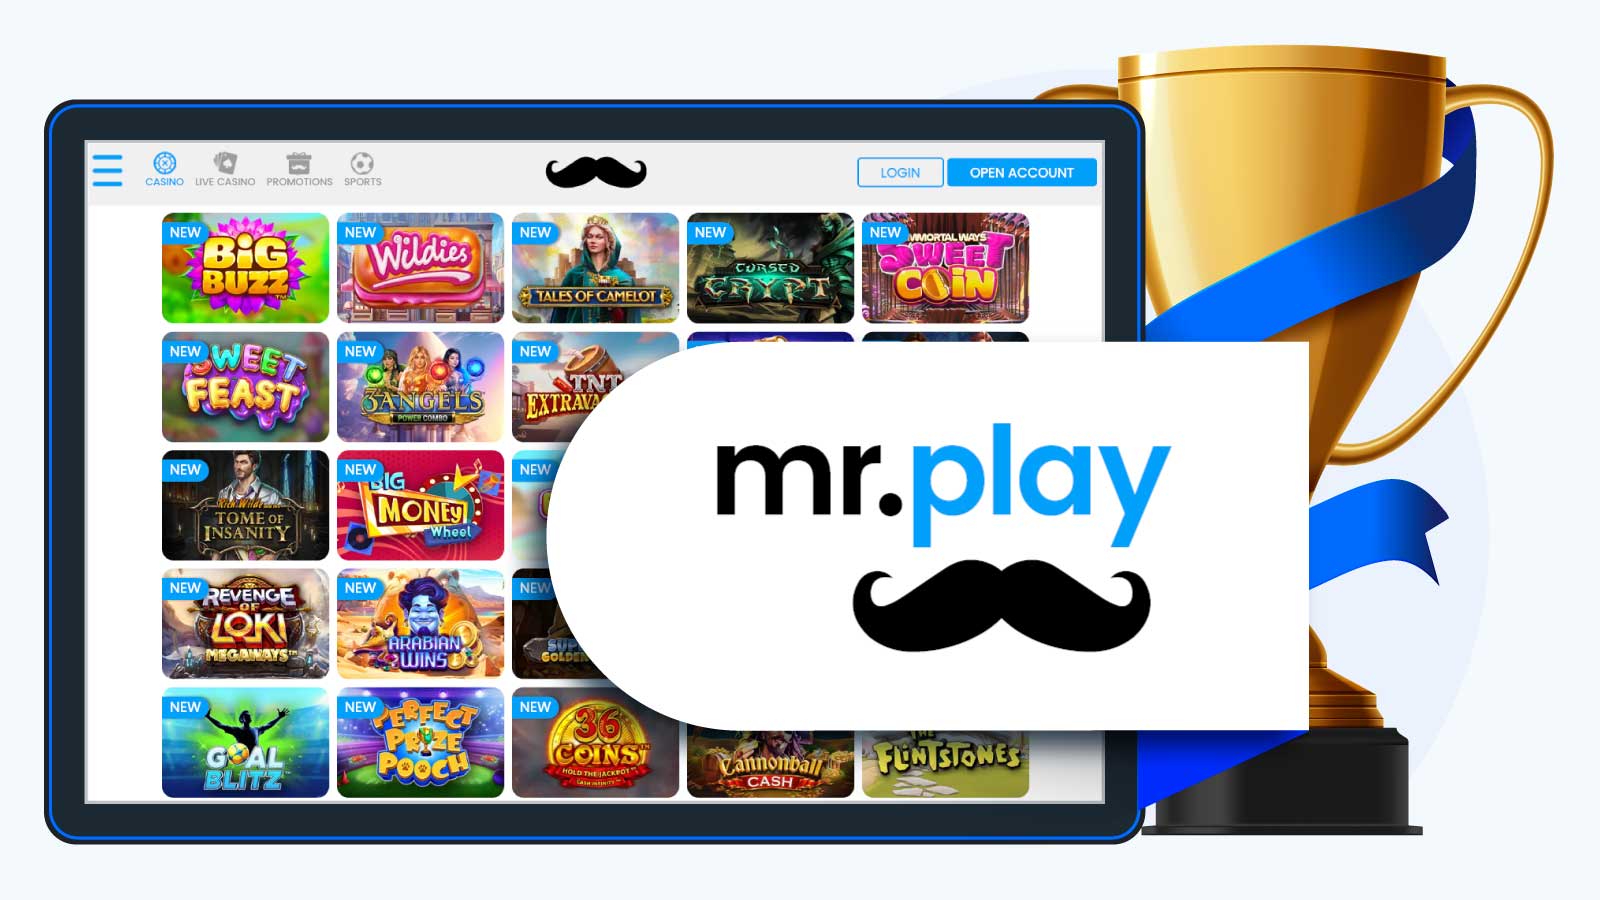 1. mr.play Casino - Best Slot Site Overall